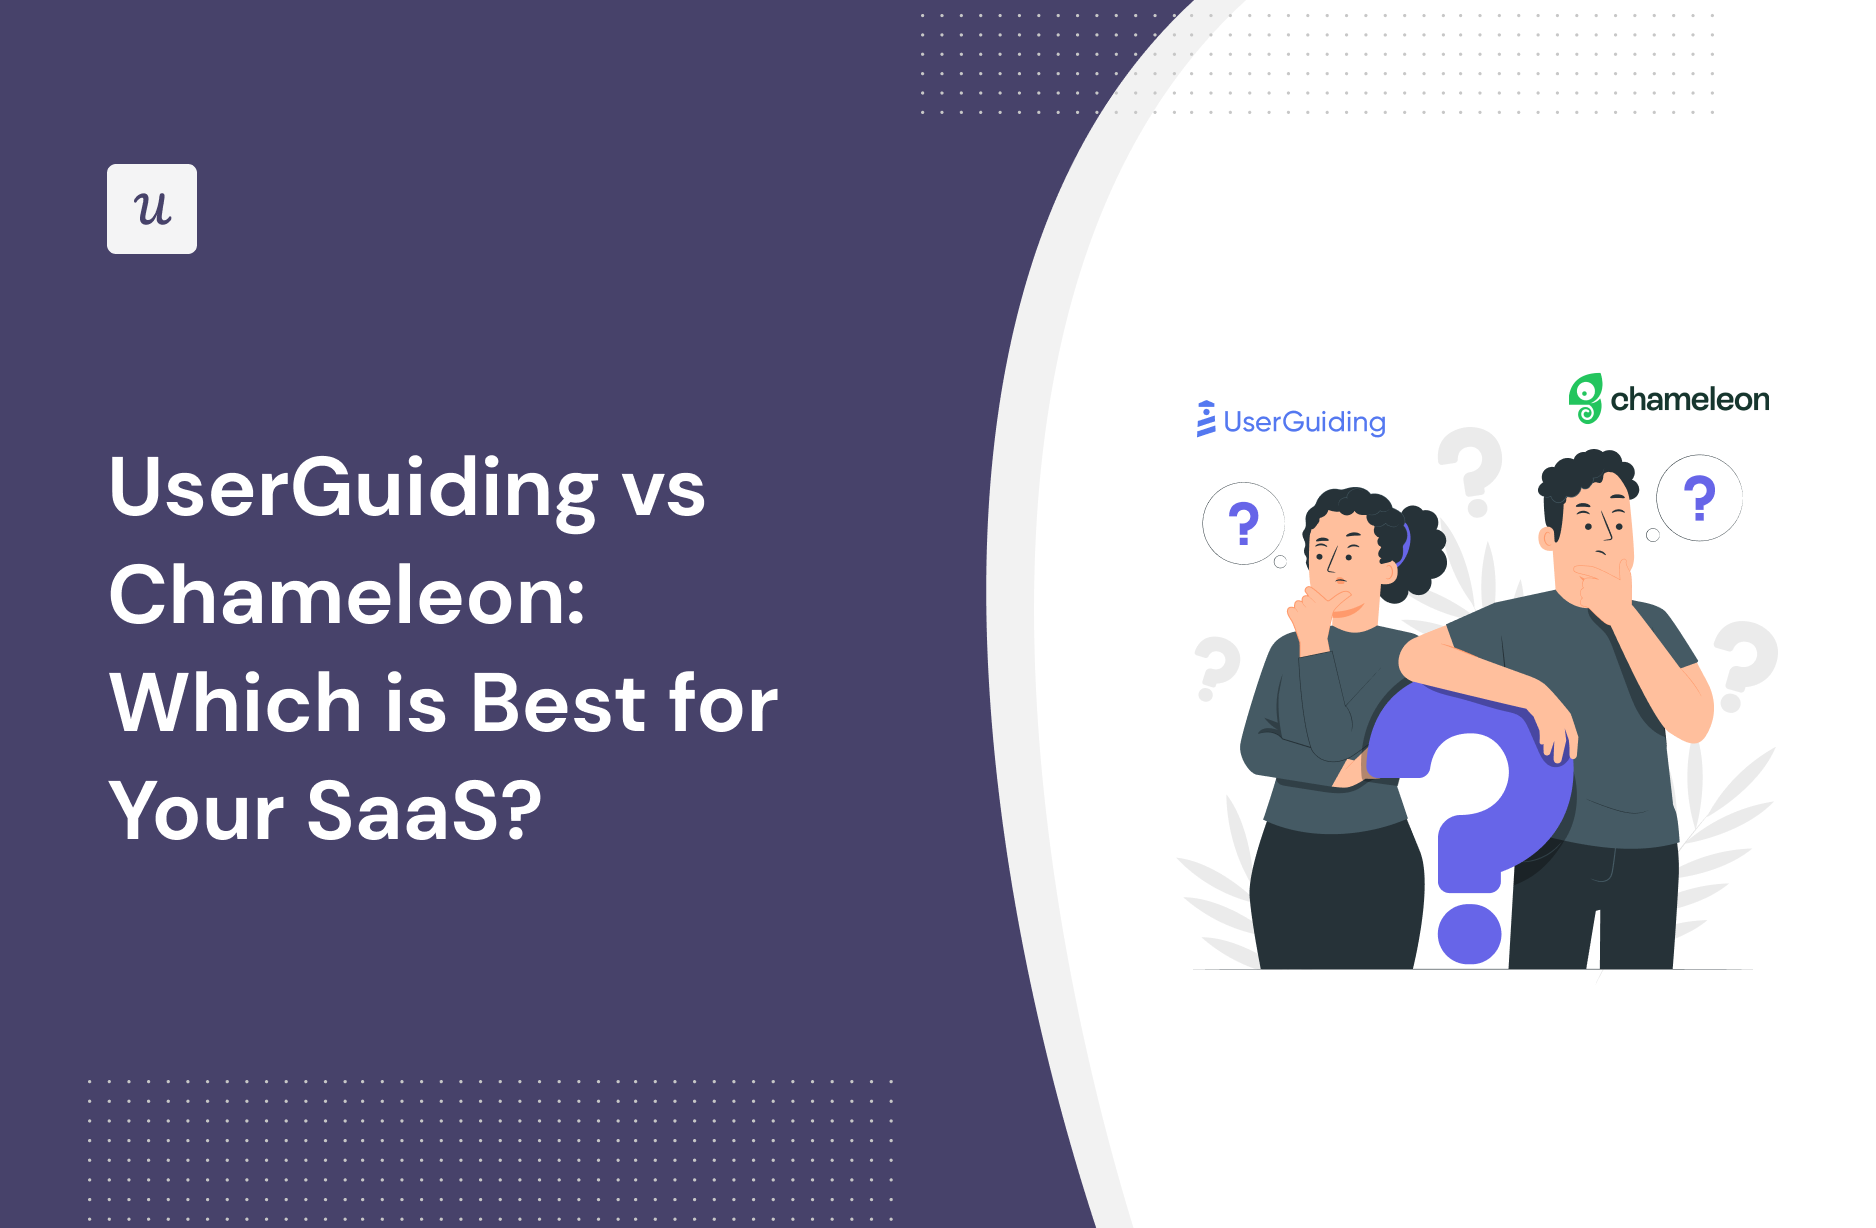 UserGuiding vs Chameleon: Which Is Best for Your SaaS?